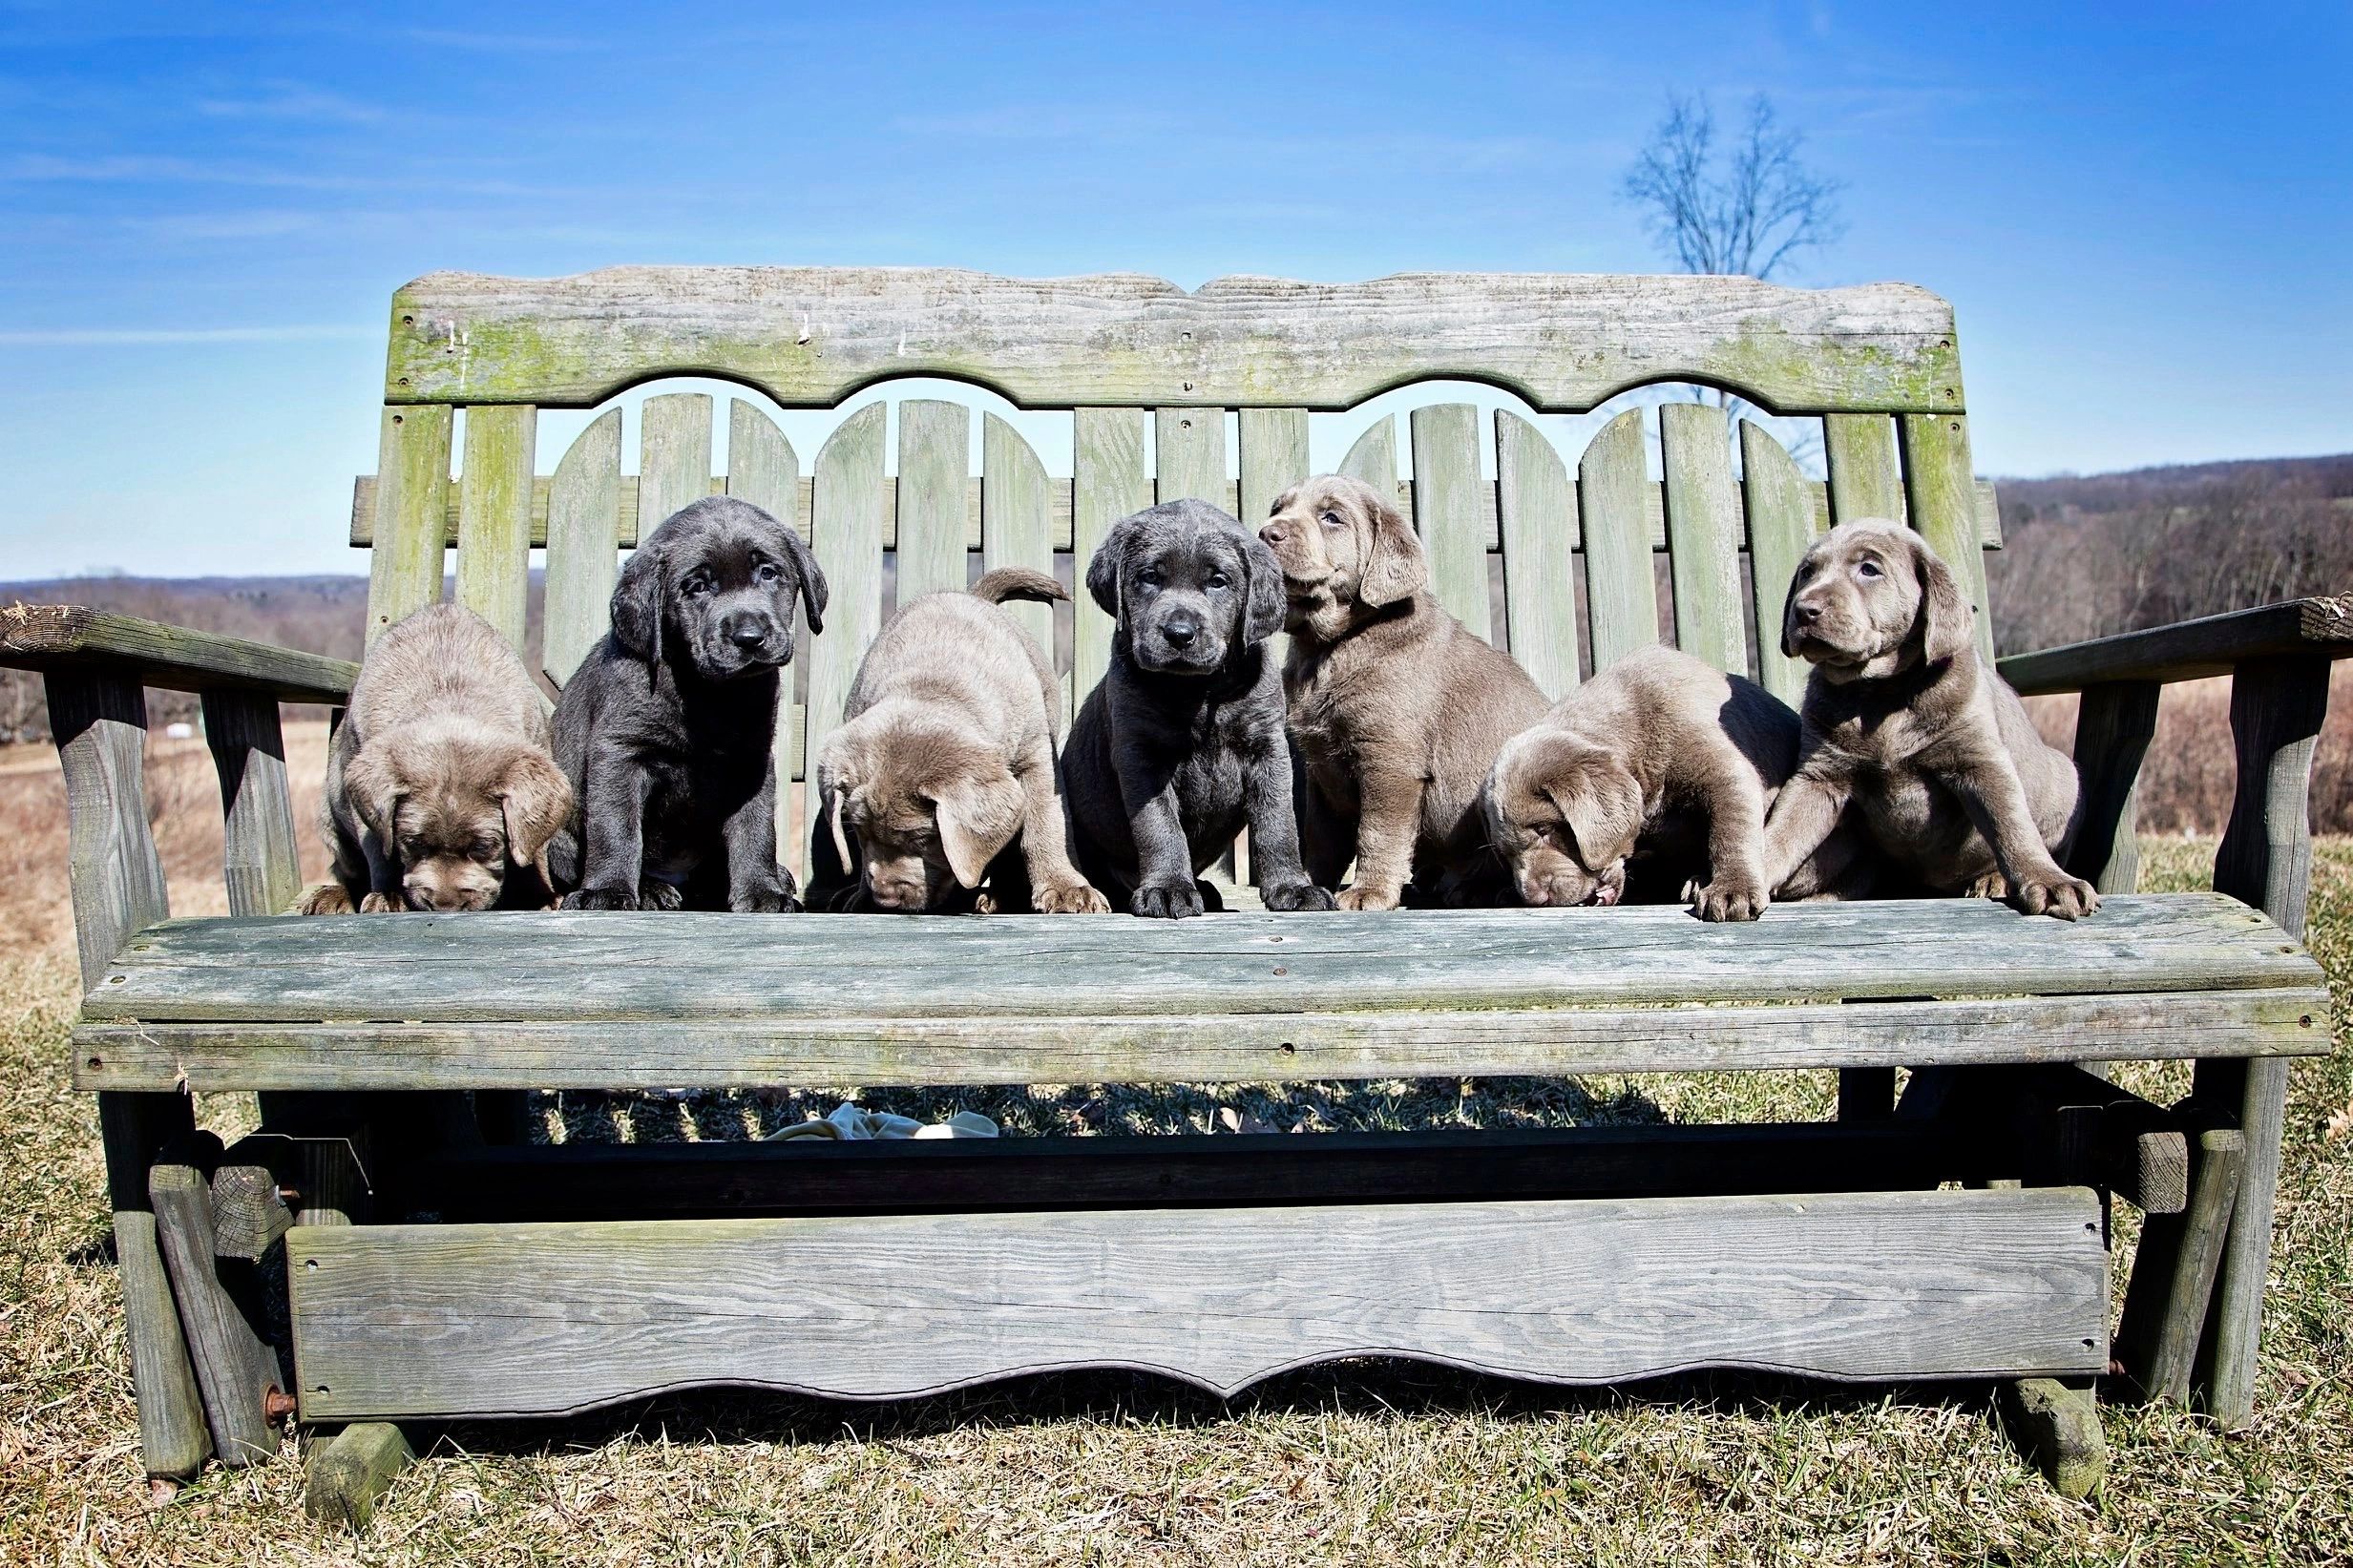 AKC Silver and Charcoal Labrador Pups For Sale near VT, CT, OH, PA, WV, VA, RI, Maine